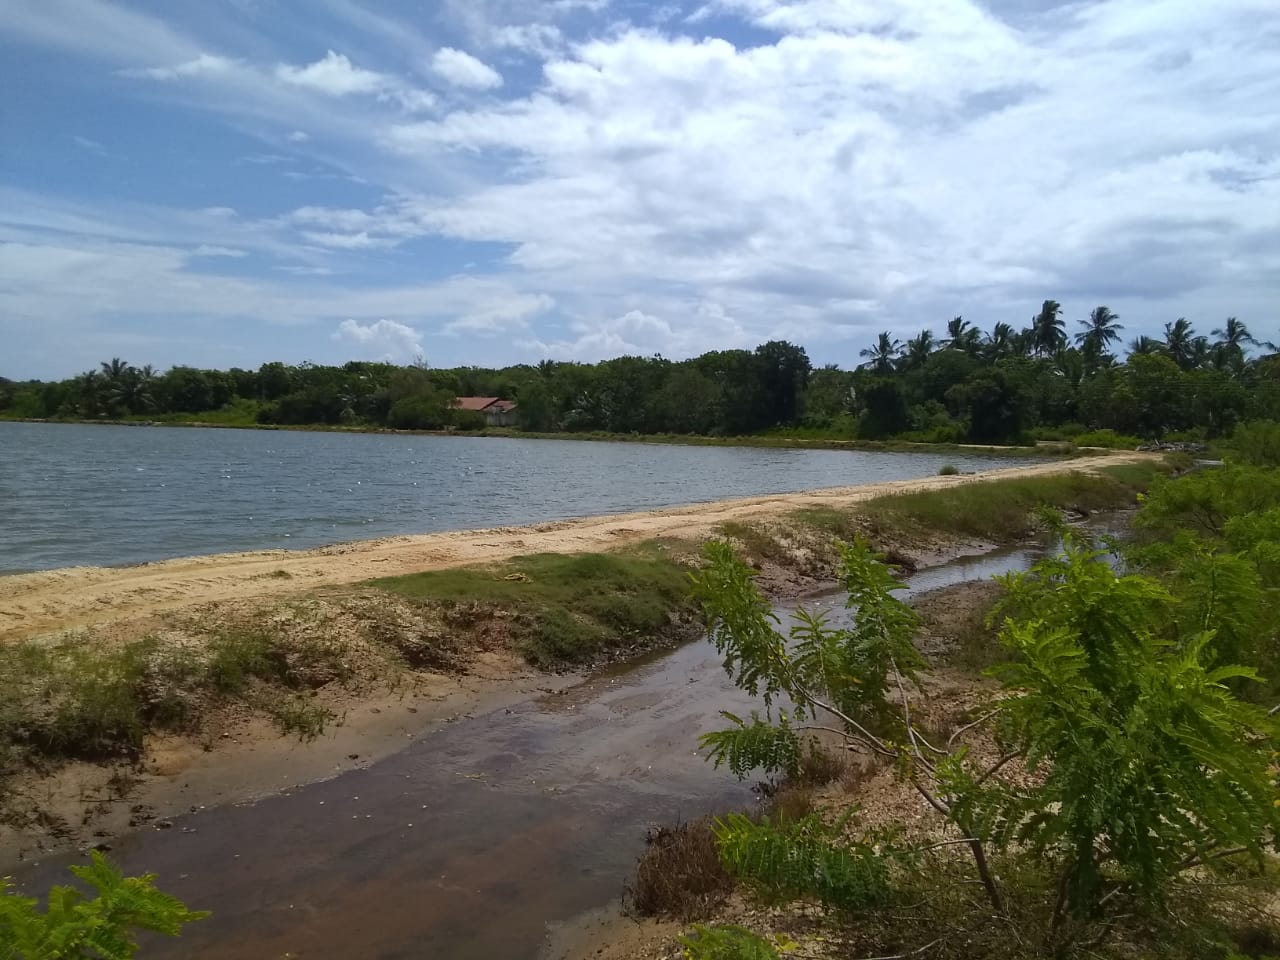 Southern Land by the lake in Hungama, for sale.